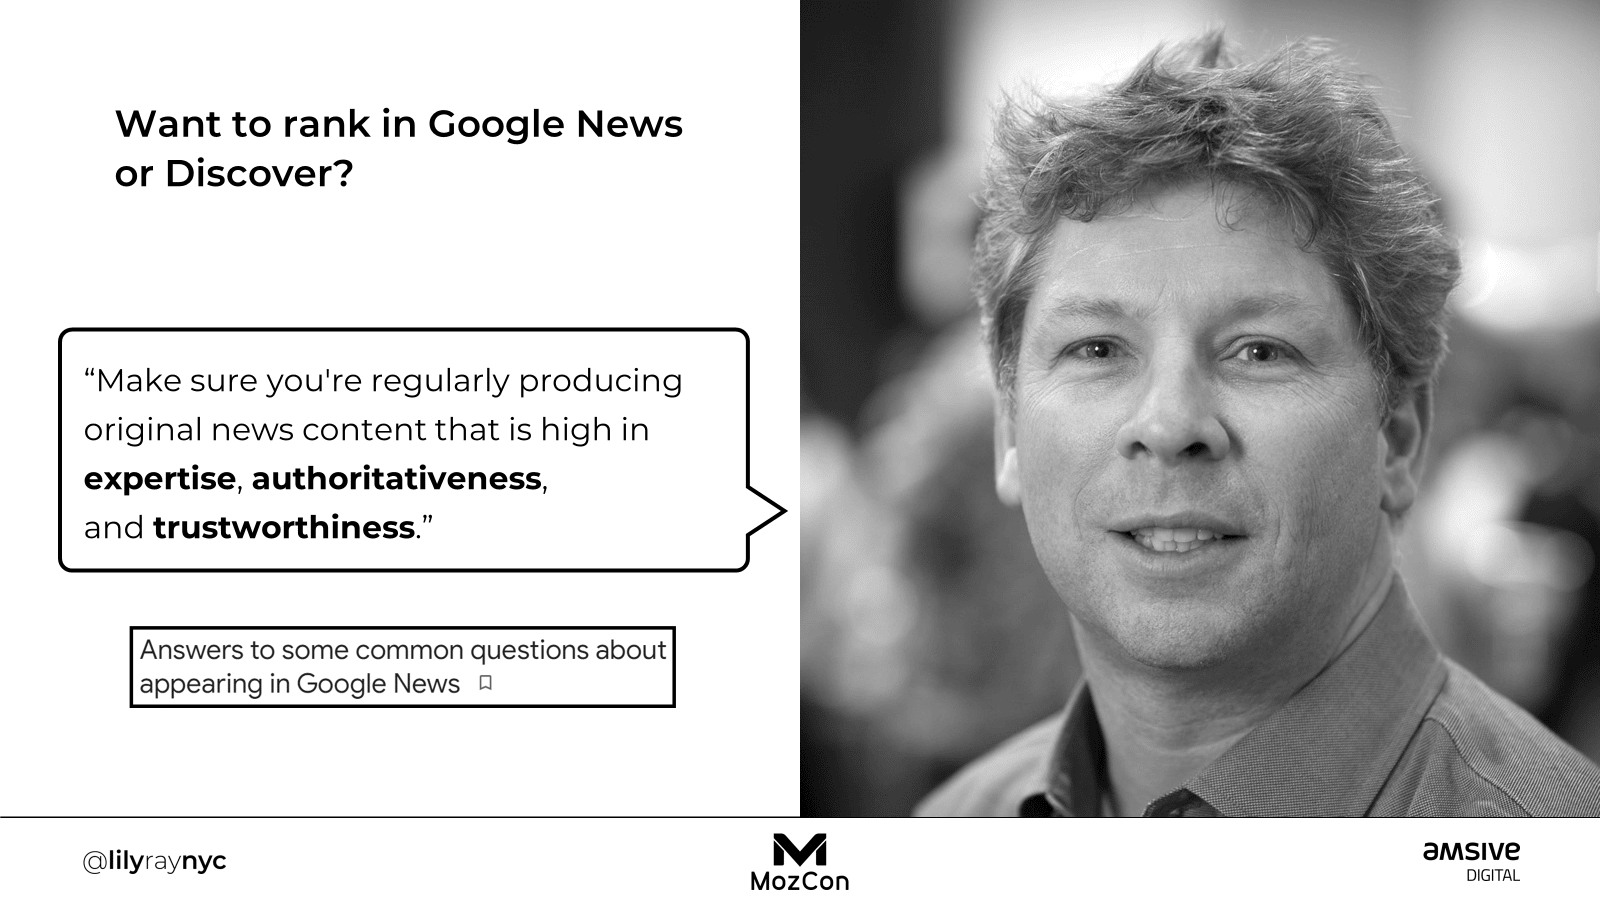 Danny Sullivan from Google stating that ranking well in Google News or Discover requires good E-A-T